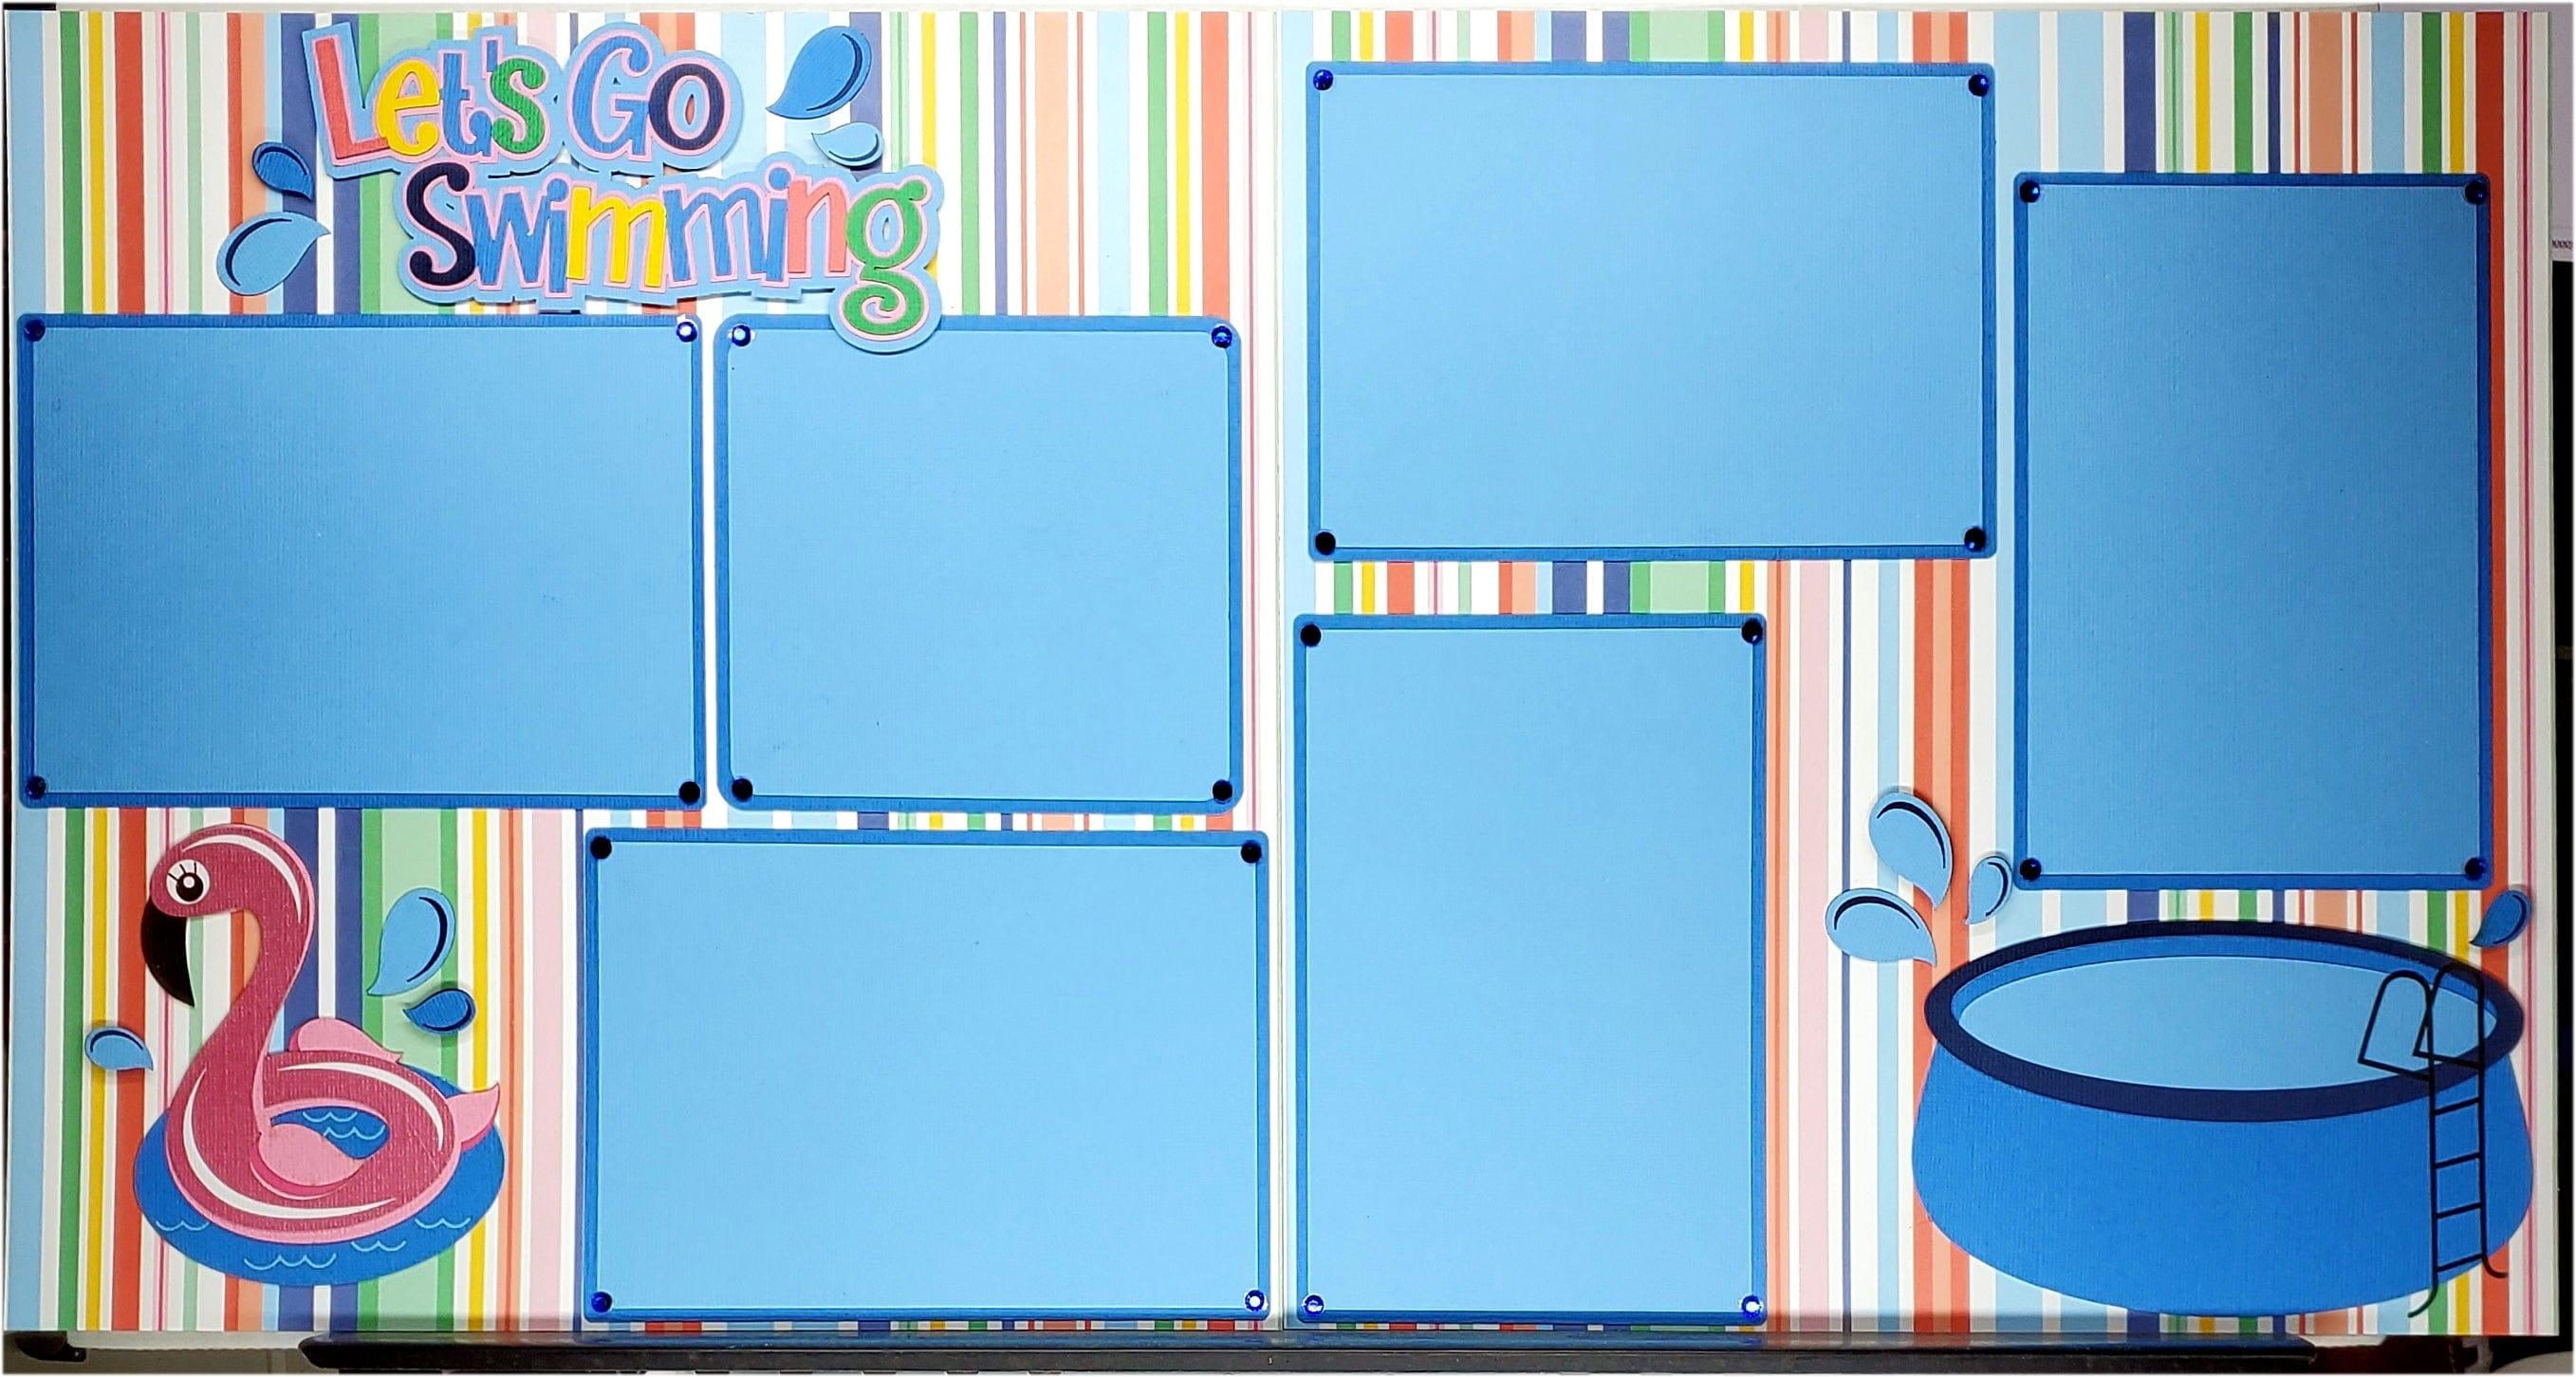 Let's Go Swimming, Pool & Flamingo Float Premade, Fully-Assembled, Embellished Two-Page 12 x 24 Scrapbook Premade by SSC Designs